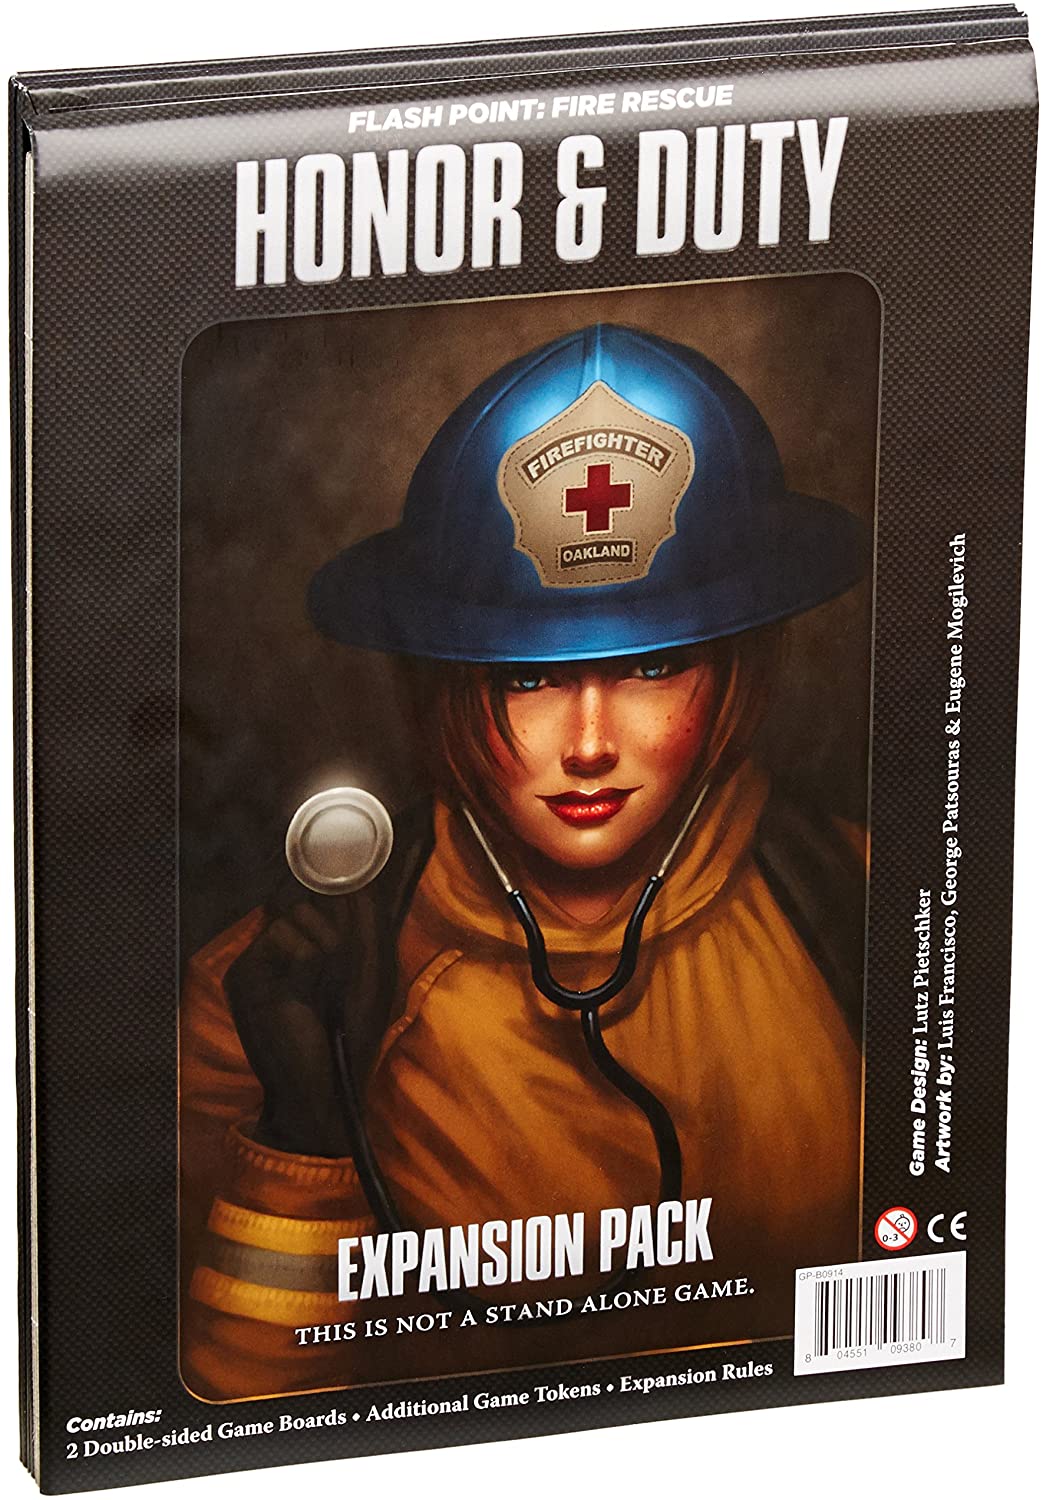 (BSG Certified USED) Flash Point: Fire Rescue - Honor and Duty